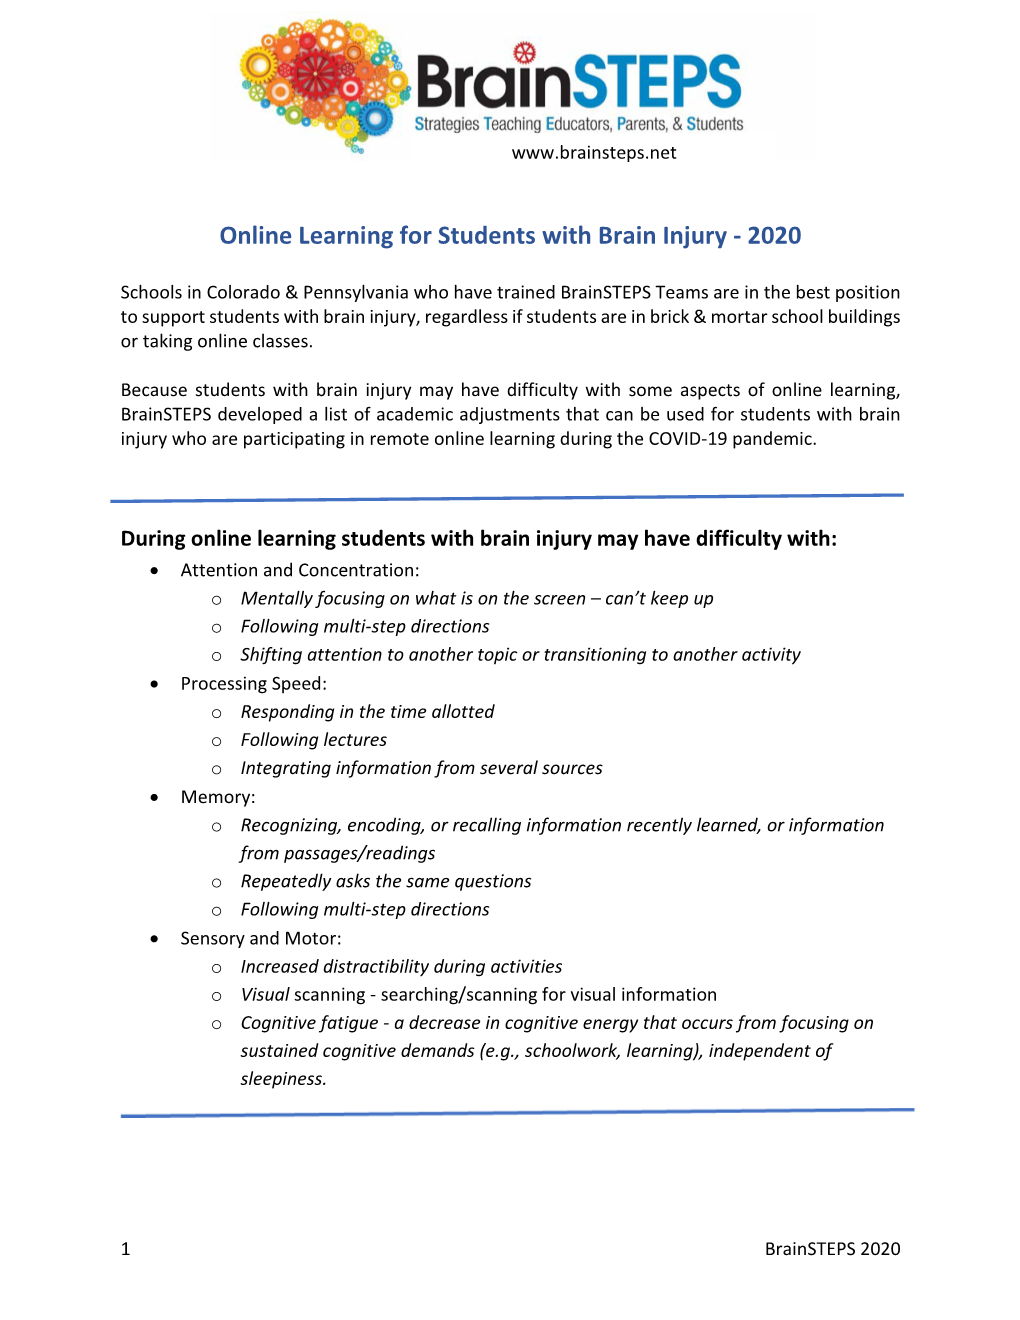 Online Learning for Students with Brain Injury - 2020